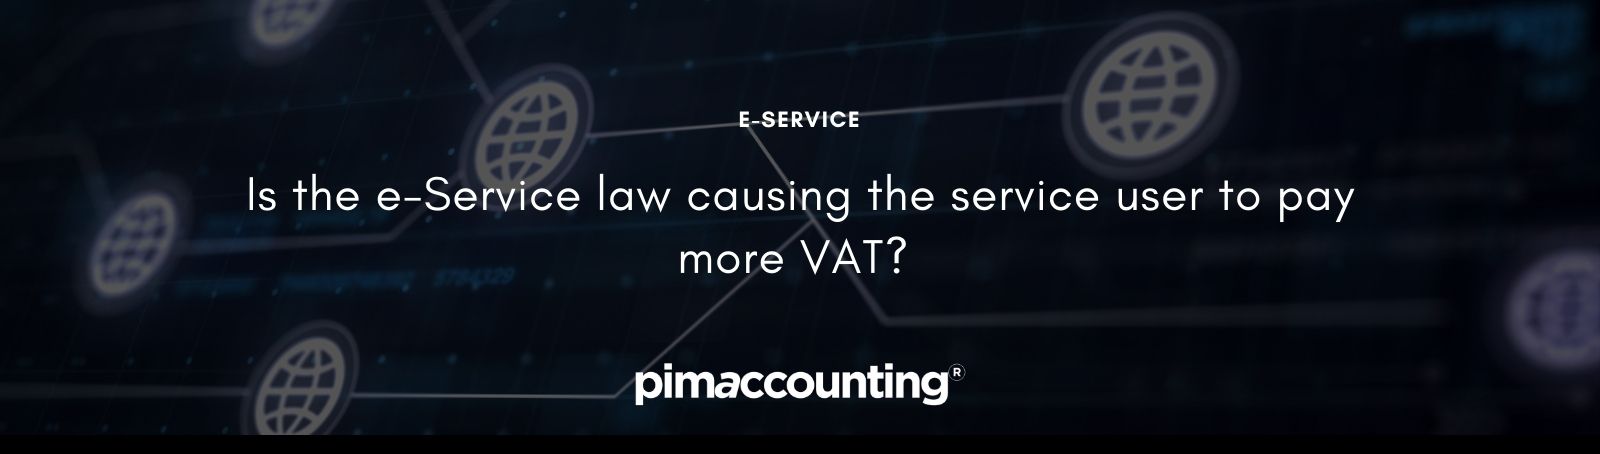 Is the e-Service law causing the service user to pay more VAT? 